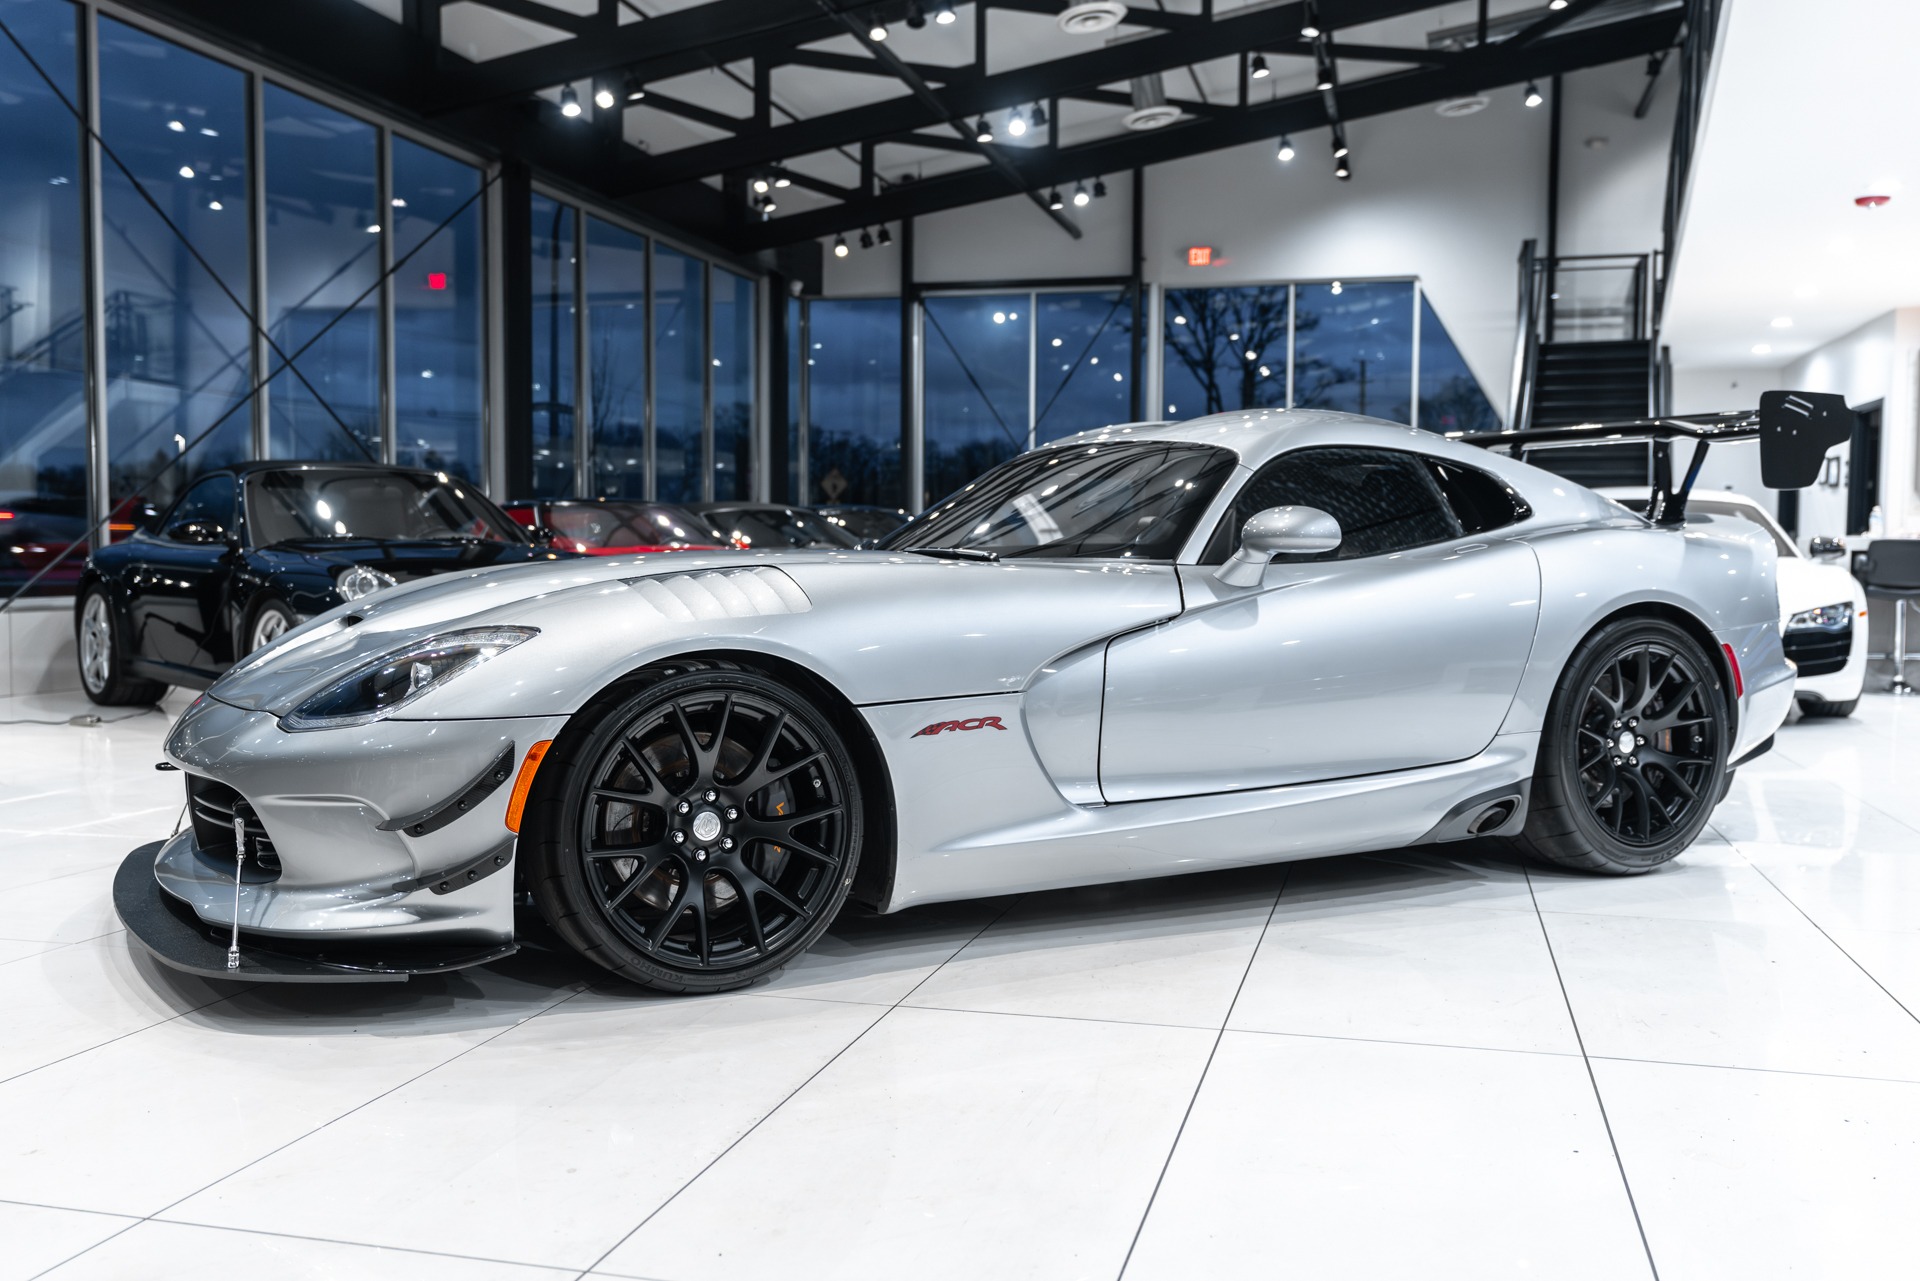 Used-2017-Dodge-Viper-ACR-Extreme-Aero-Coupe-Excellent-Condition-Collector-Car-ONLY-7k-Miles